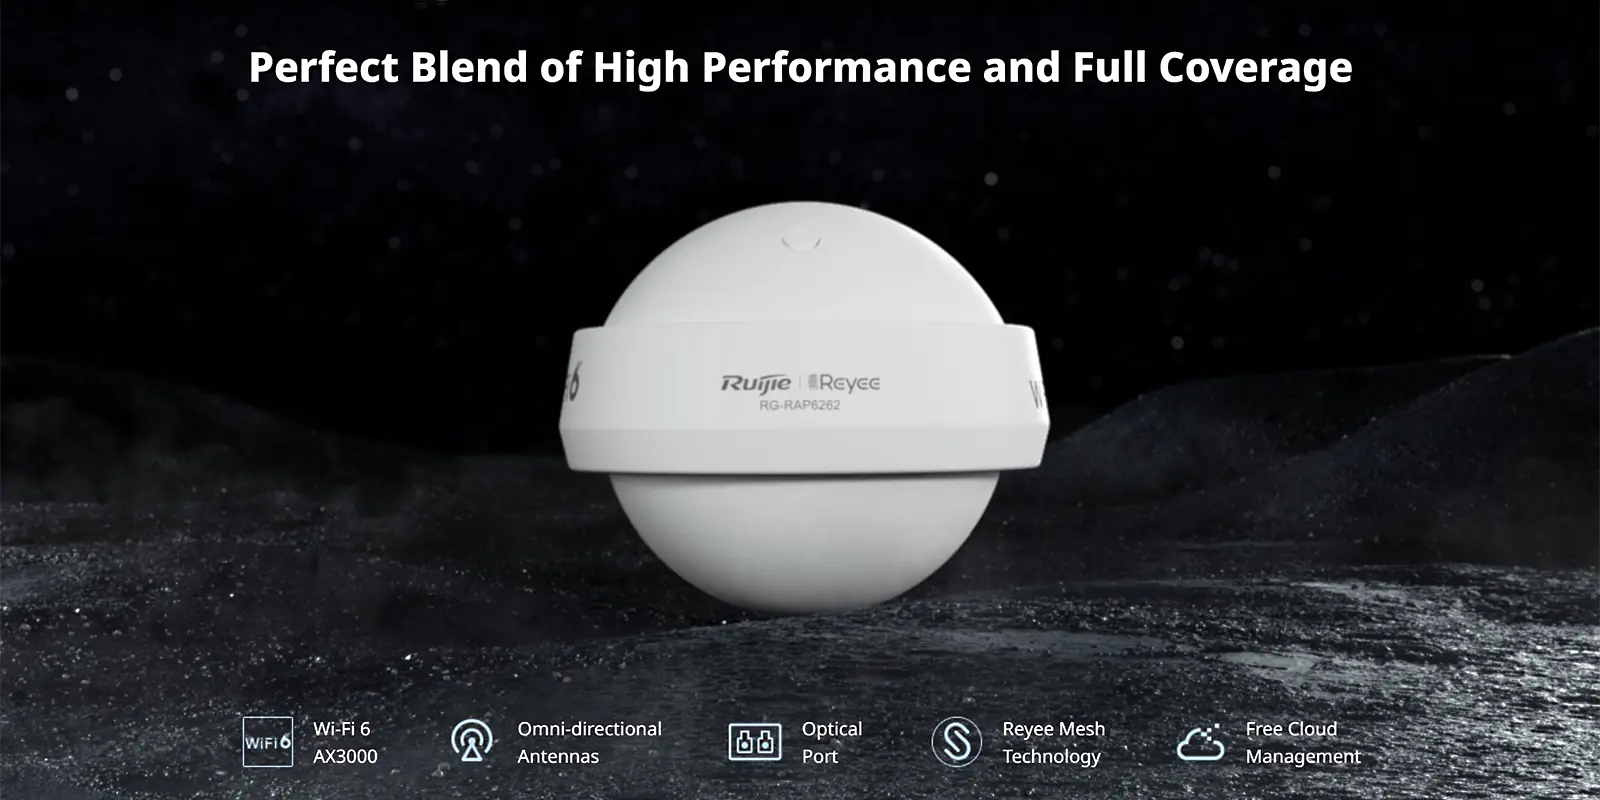 A spherical outdoor wireless access point with text above reading 'Perfect Blend of High Performance and Full Coverage'.